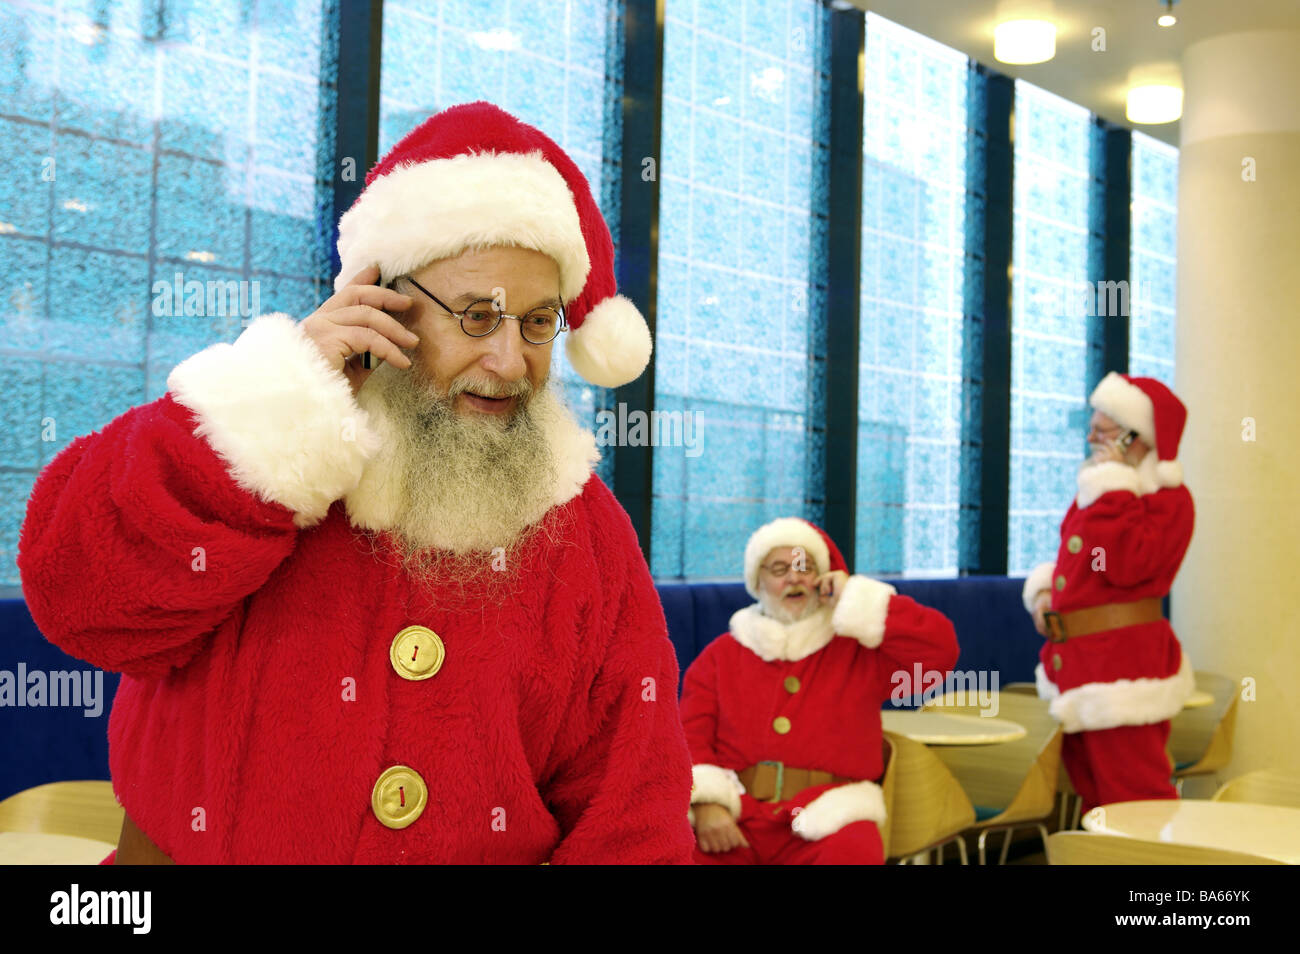 Cafeteria Santa Claus cheerfully cell phones telephones fuzziness Christmas people men three disguise outfits glasses beards Stock Photo